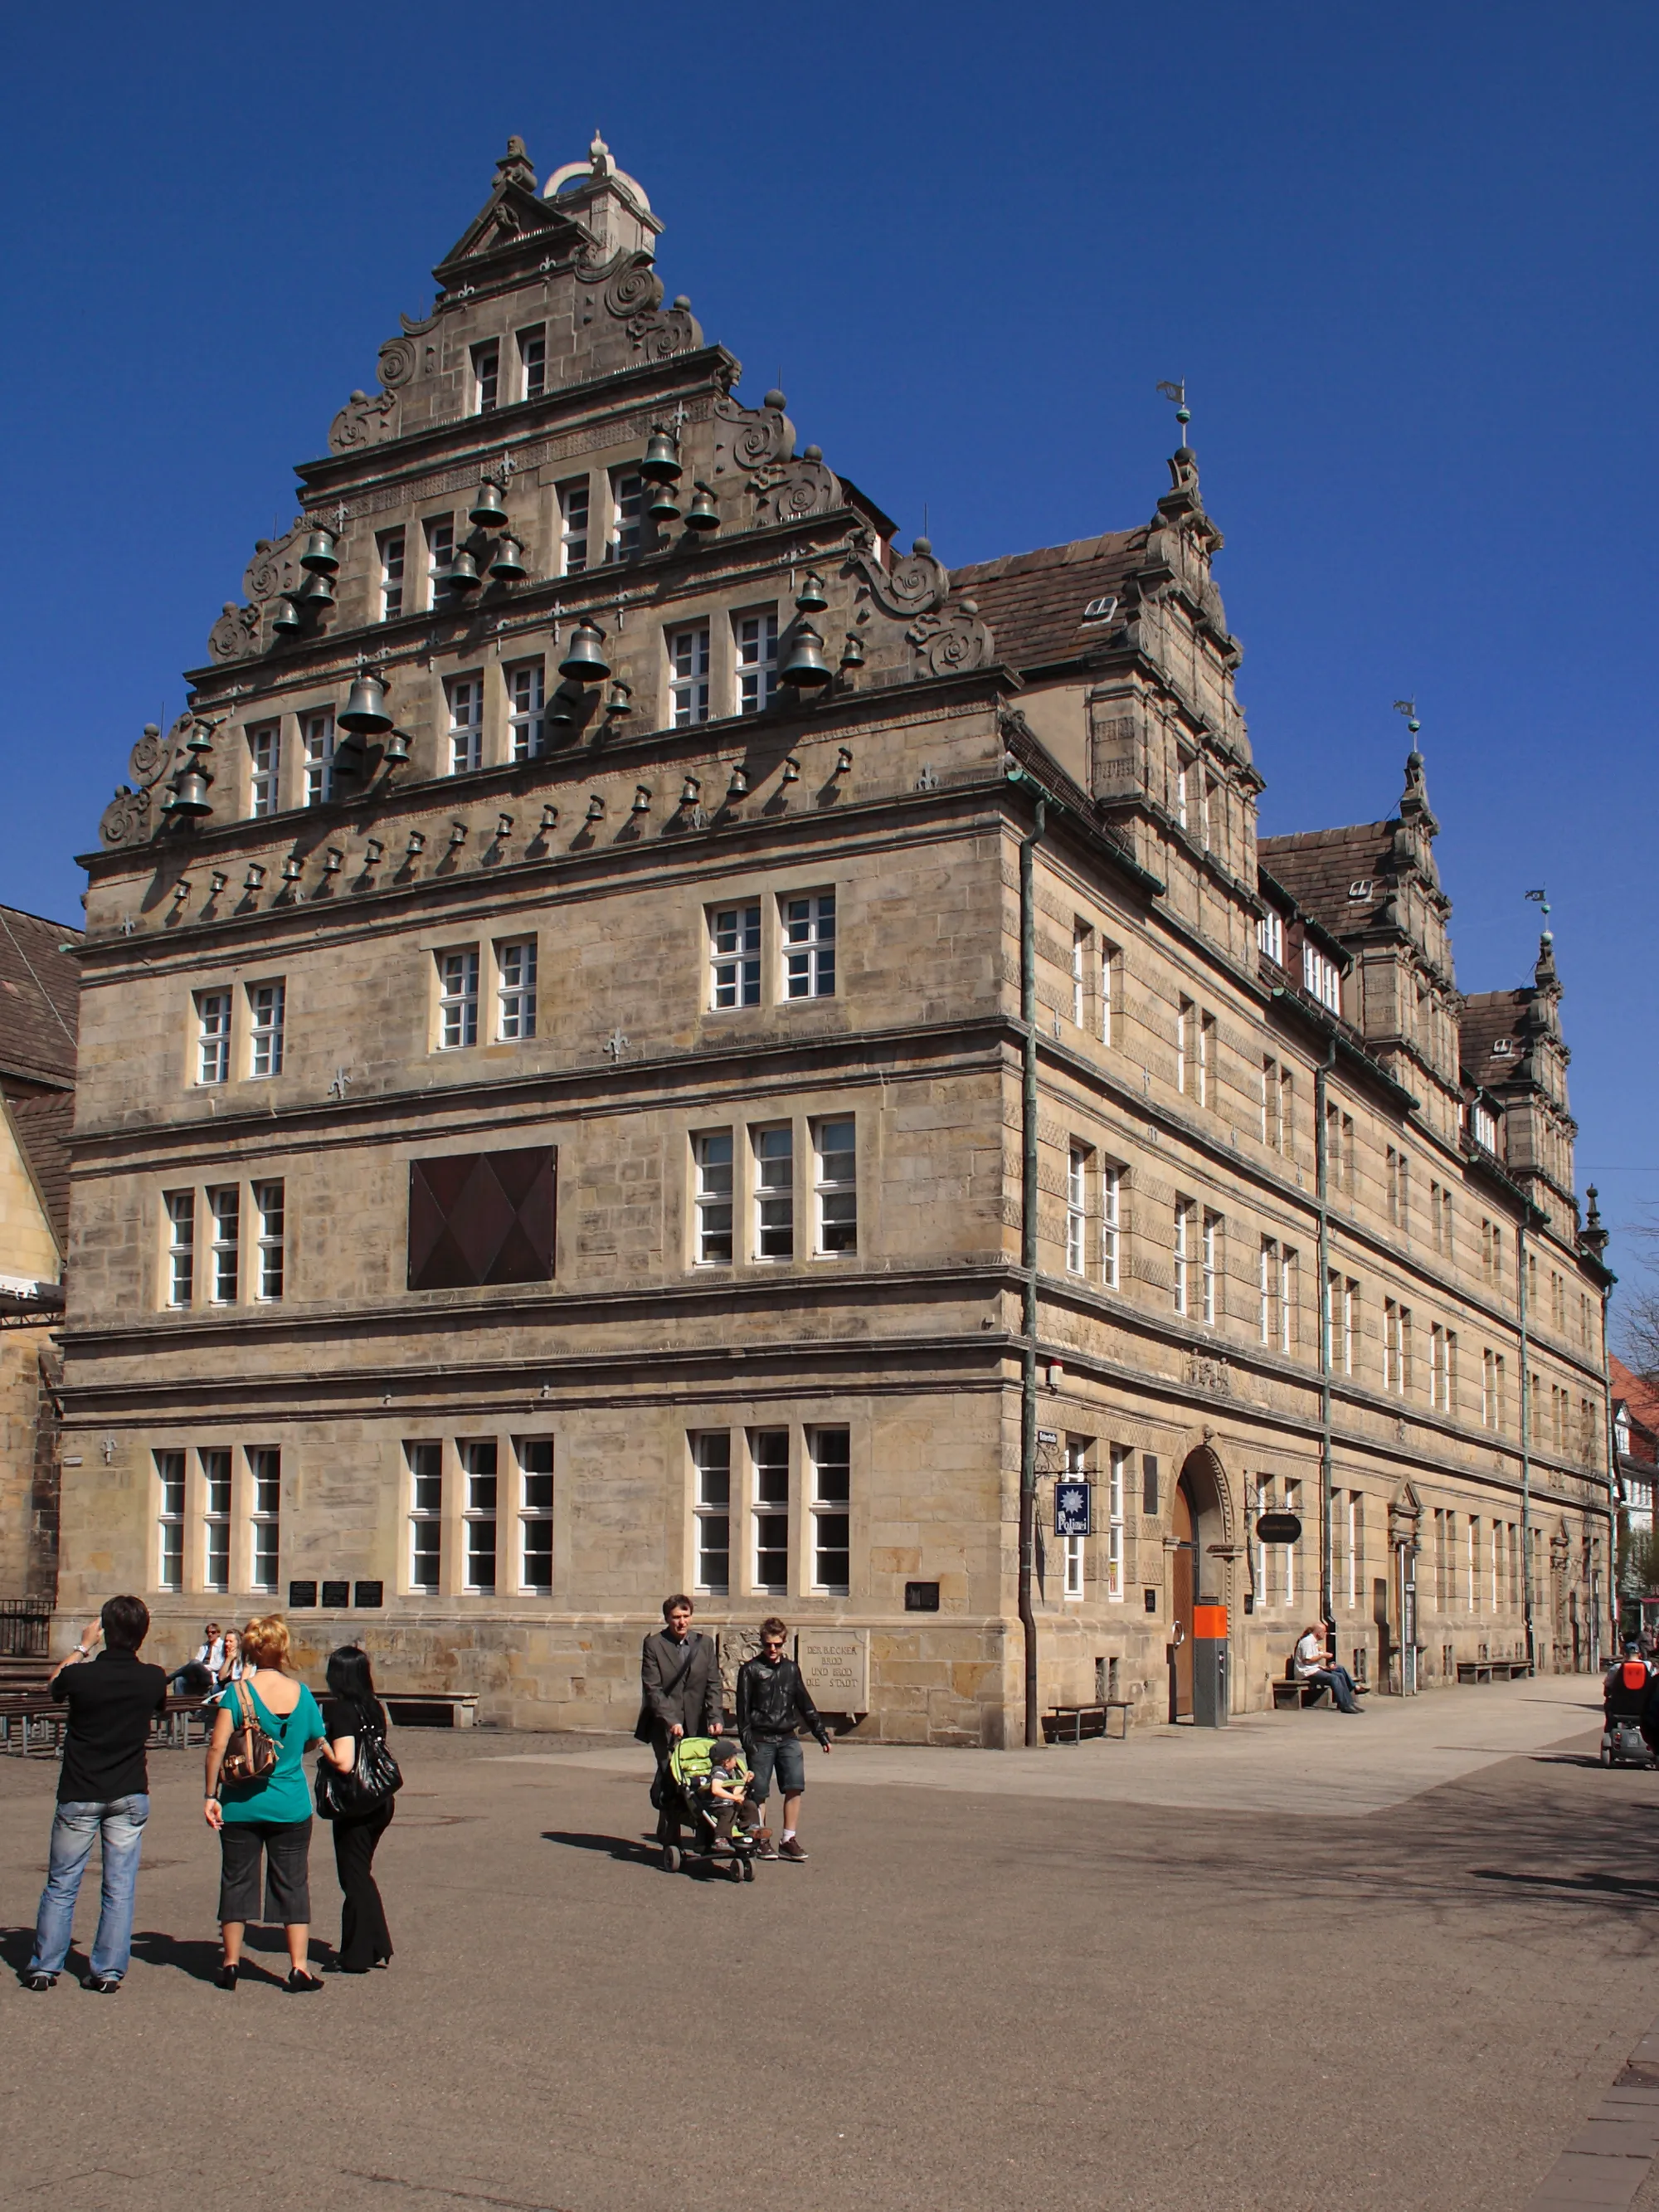 Photo showing: This image shows an ancient building called "Hochzeitshaus" in Hameln, Germany.